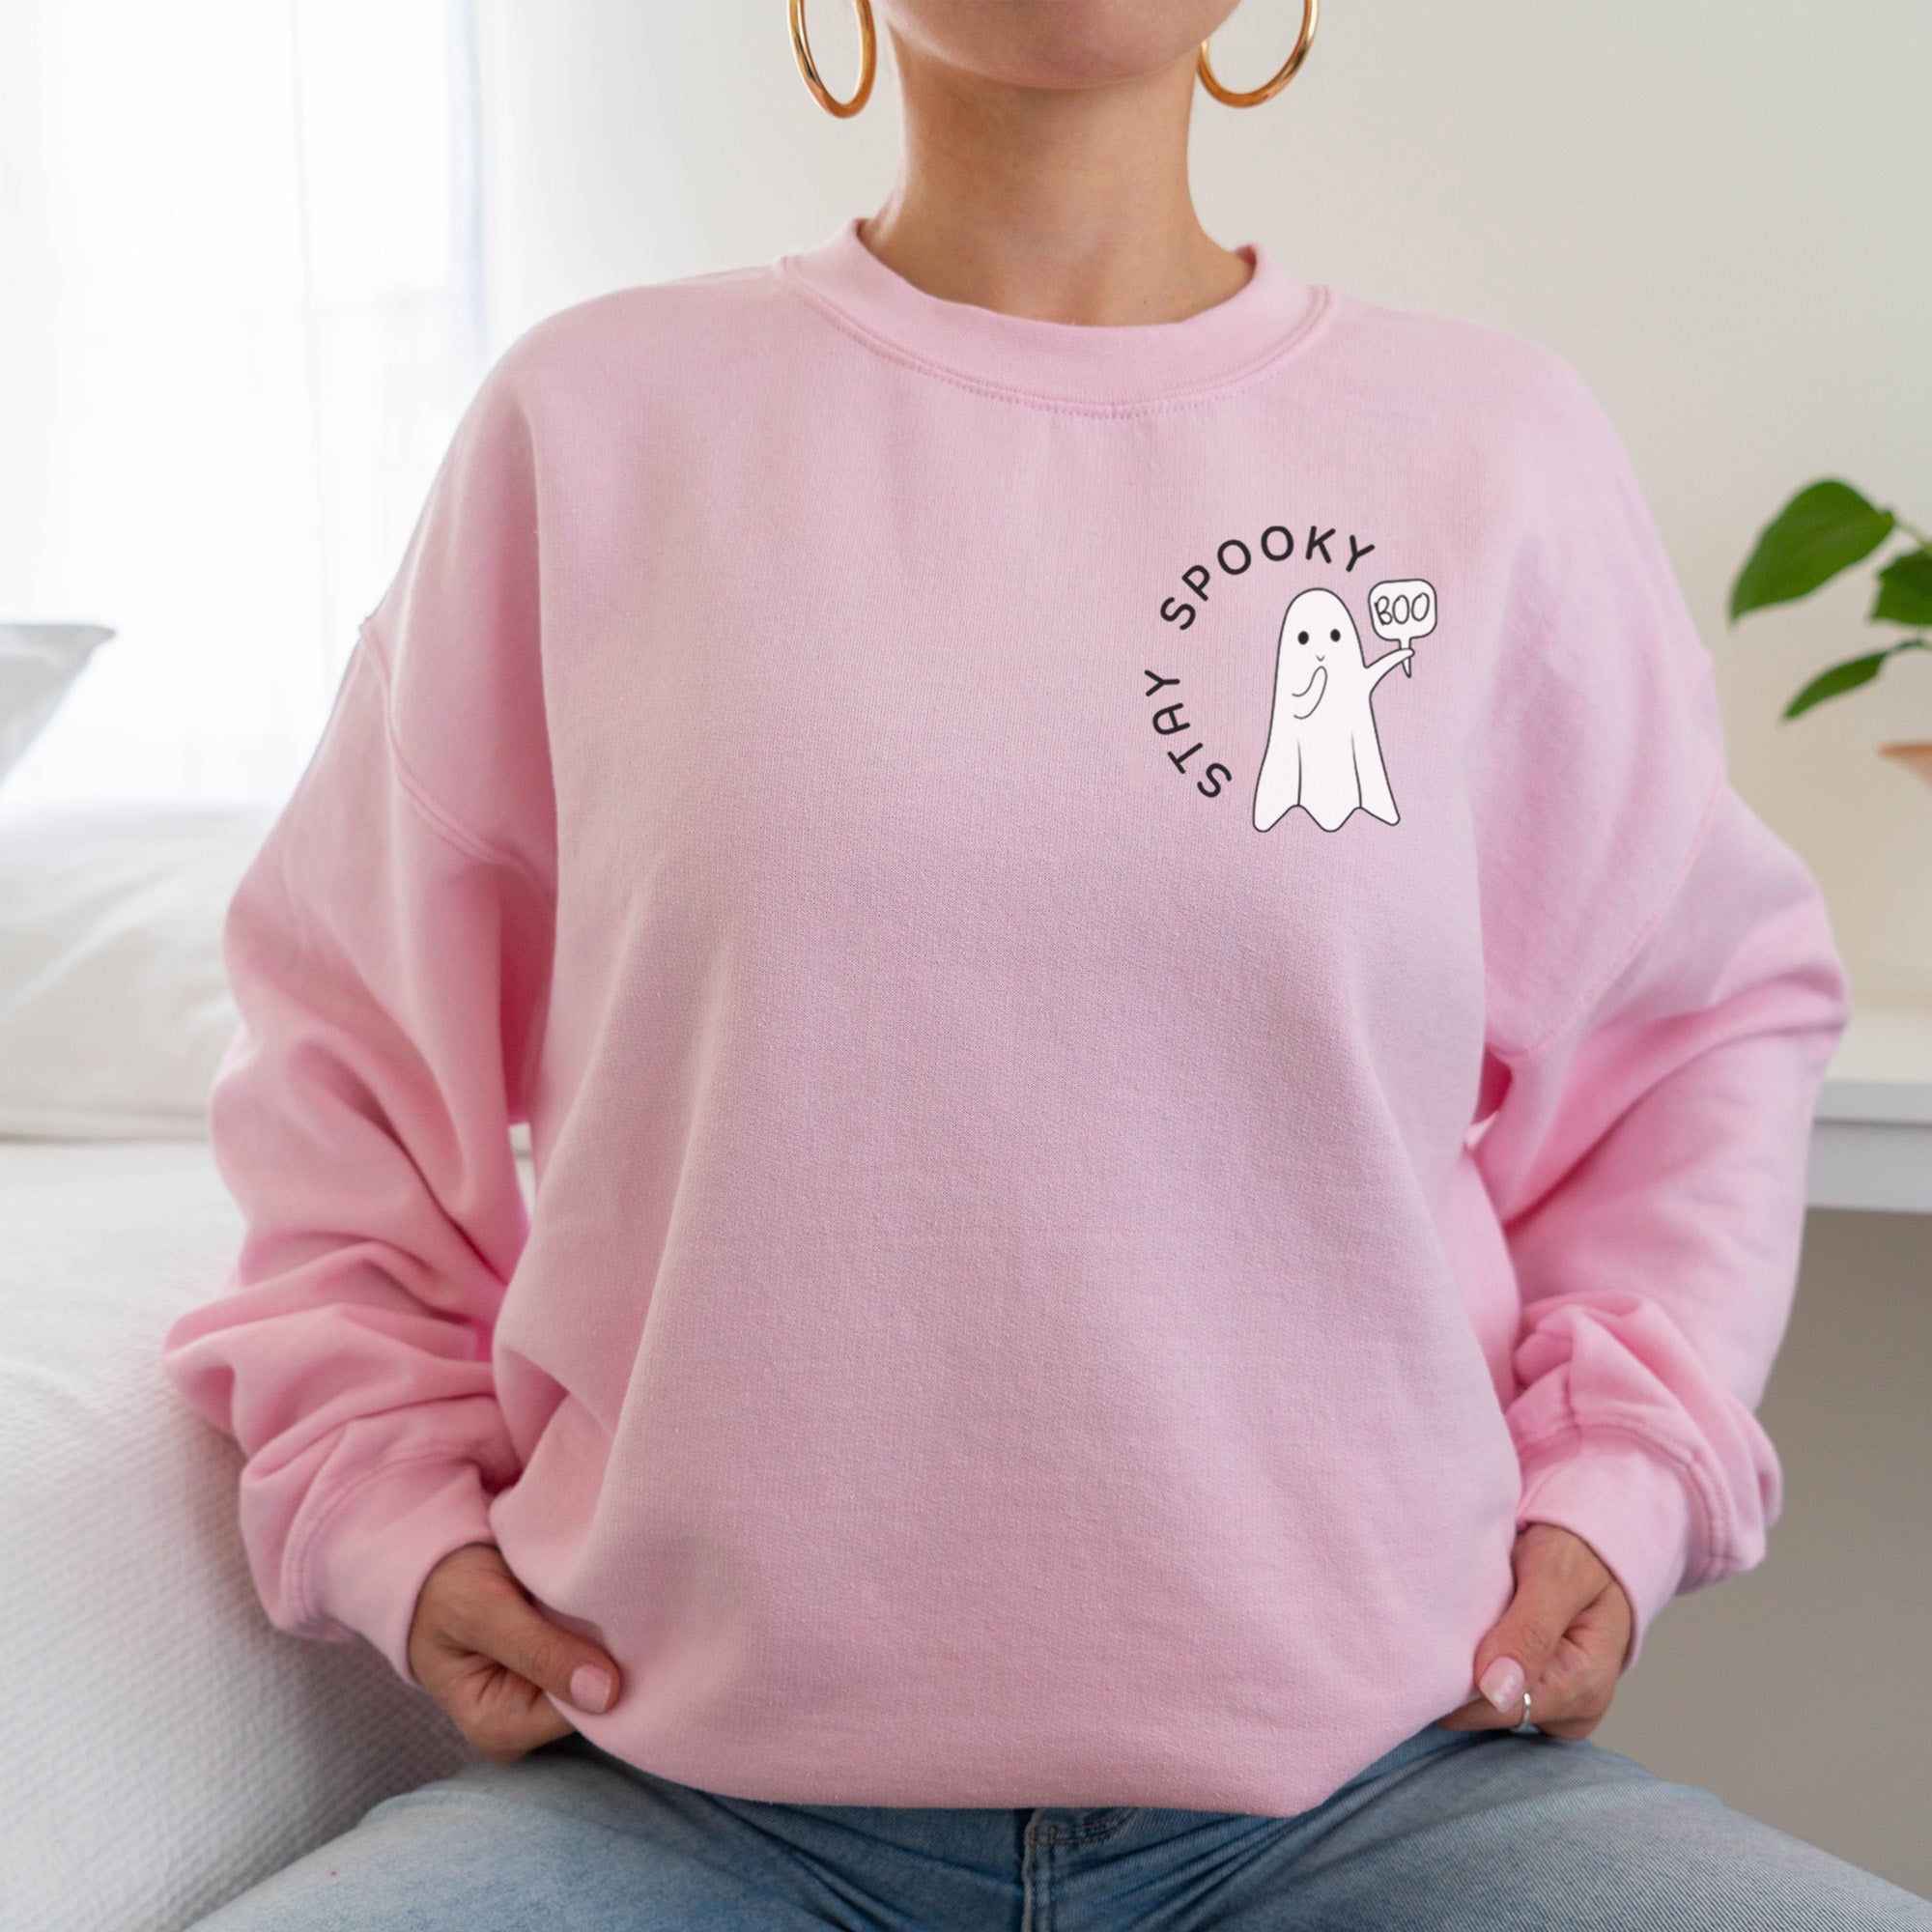 Cute Halloween Sweatshirt for women featuring the words Stay Spooky with a friendly ghost. allSKUs